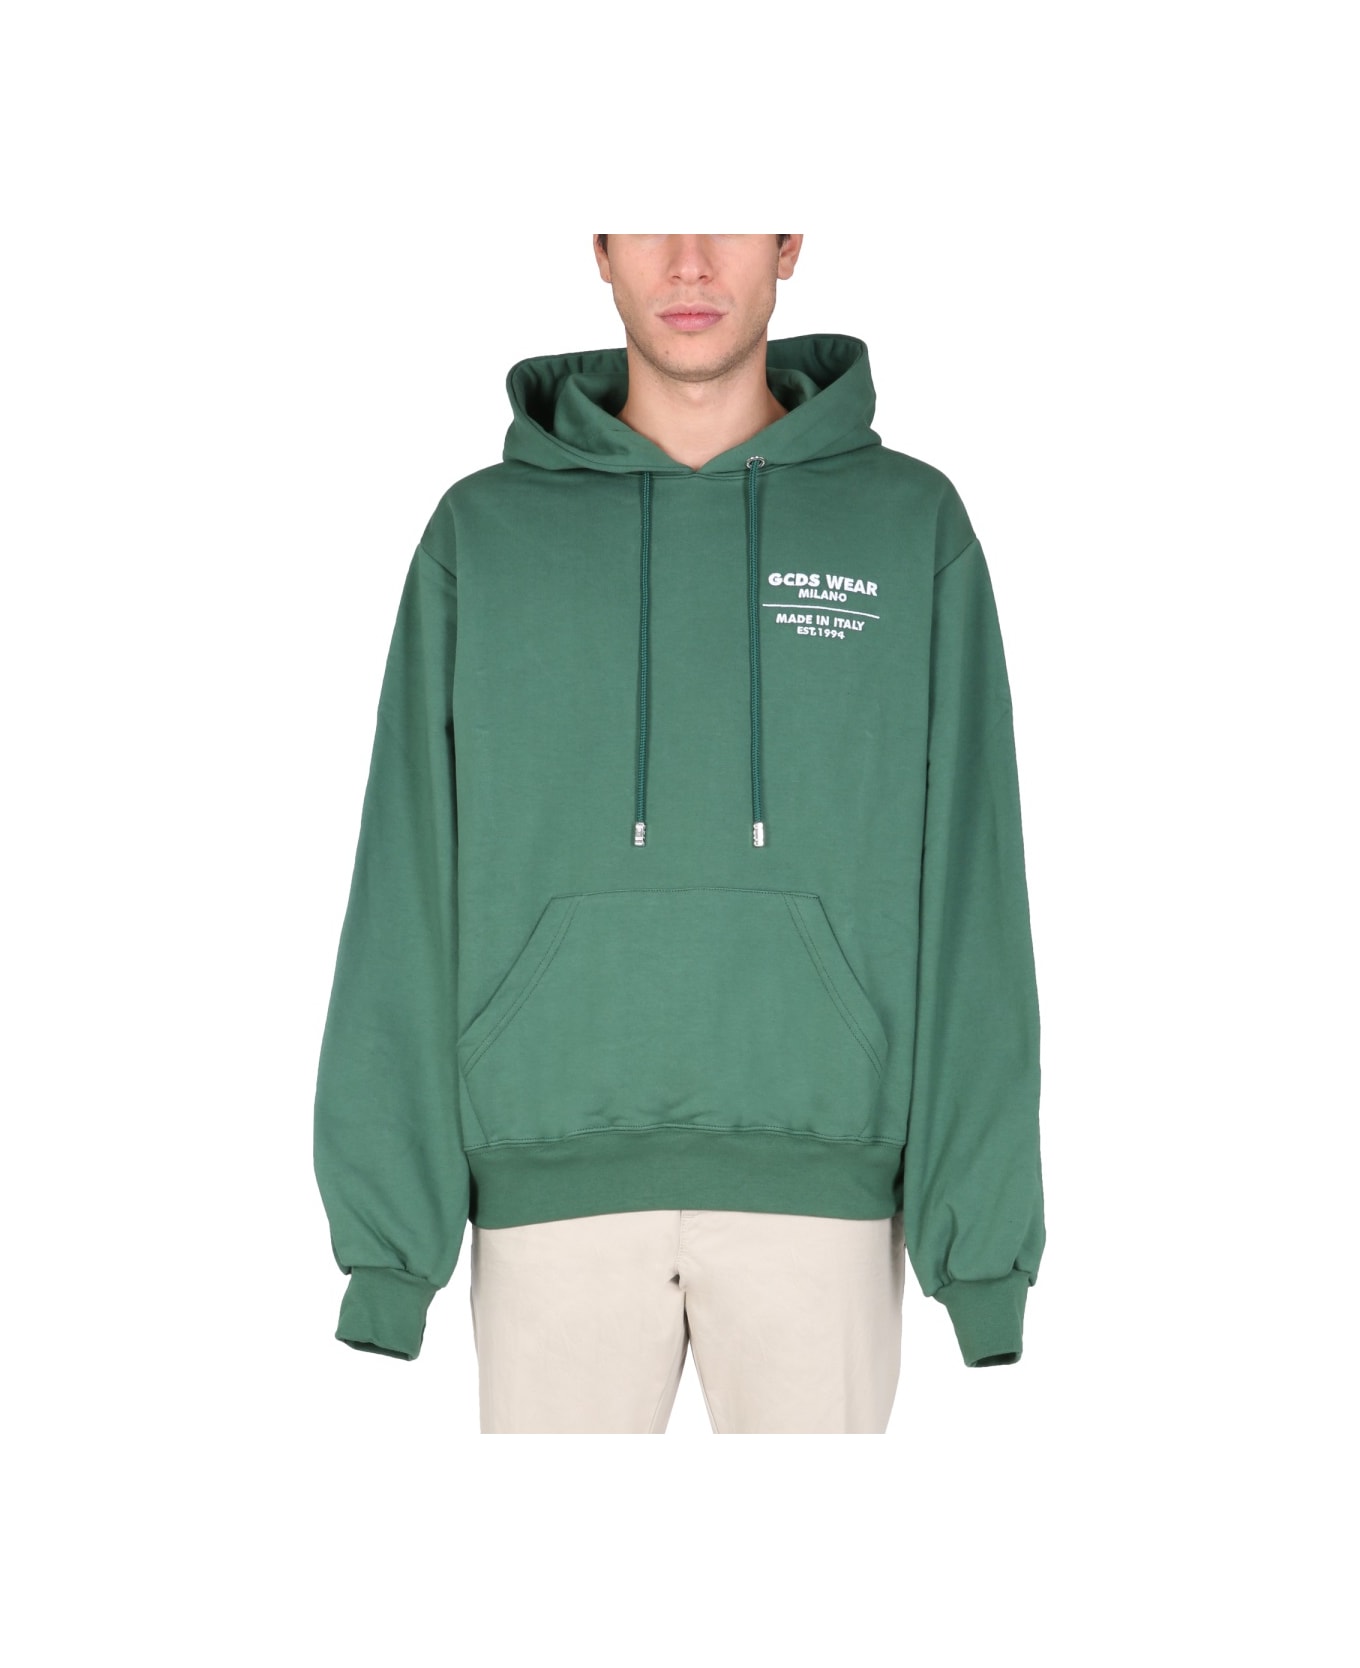 GCDS Sweatshirt With Embroidered College - GREEN